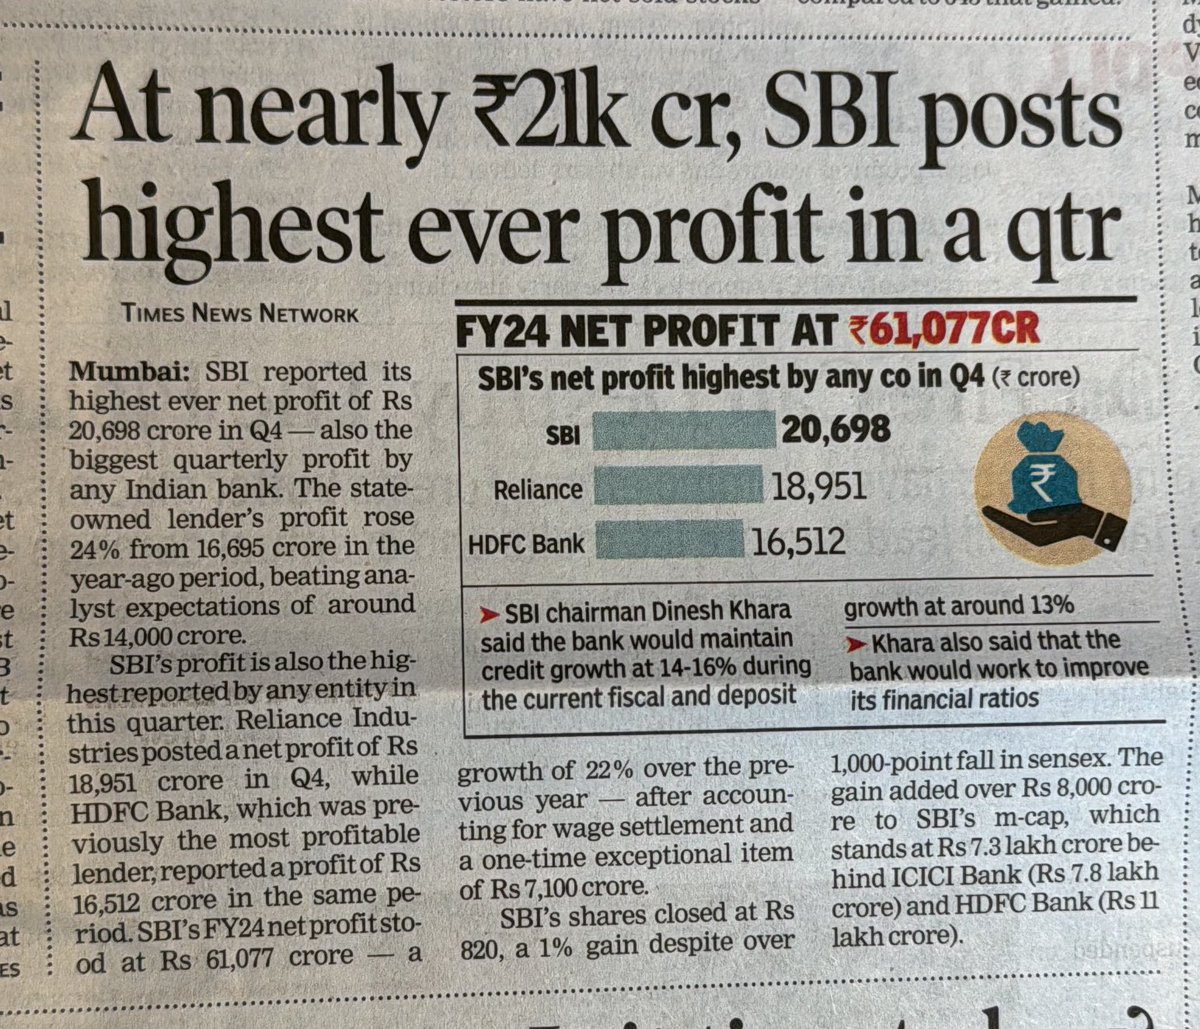 SBI has become the 'Most Profitable' company in India. Pips Reliance in profitability race. And some says that Modi govt has destroyed PSUs under its tenure